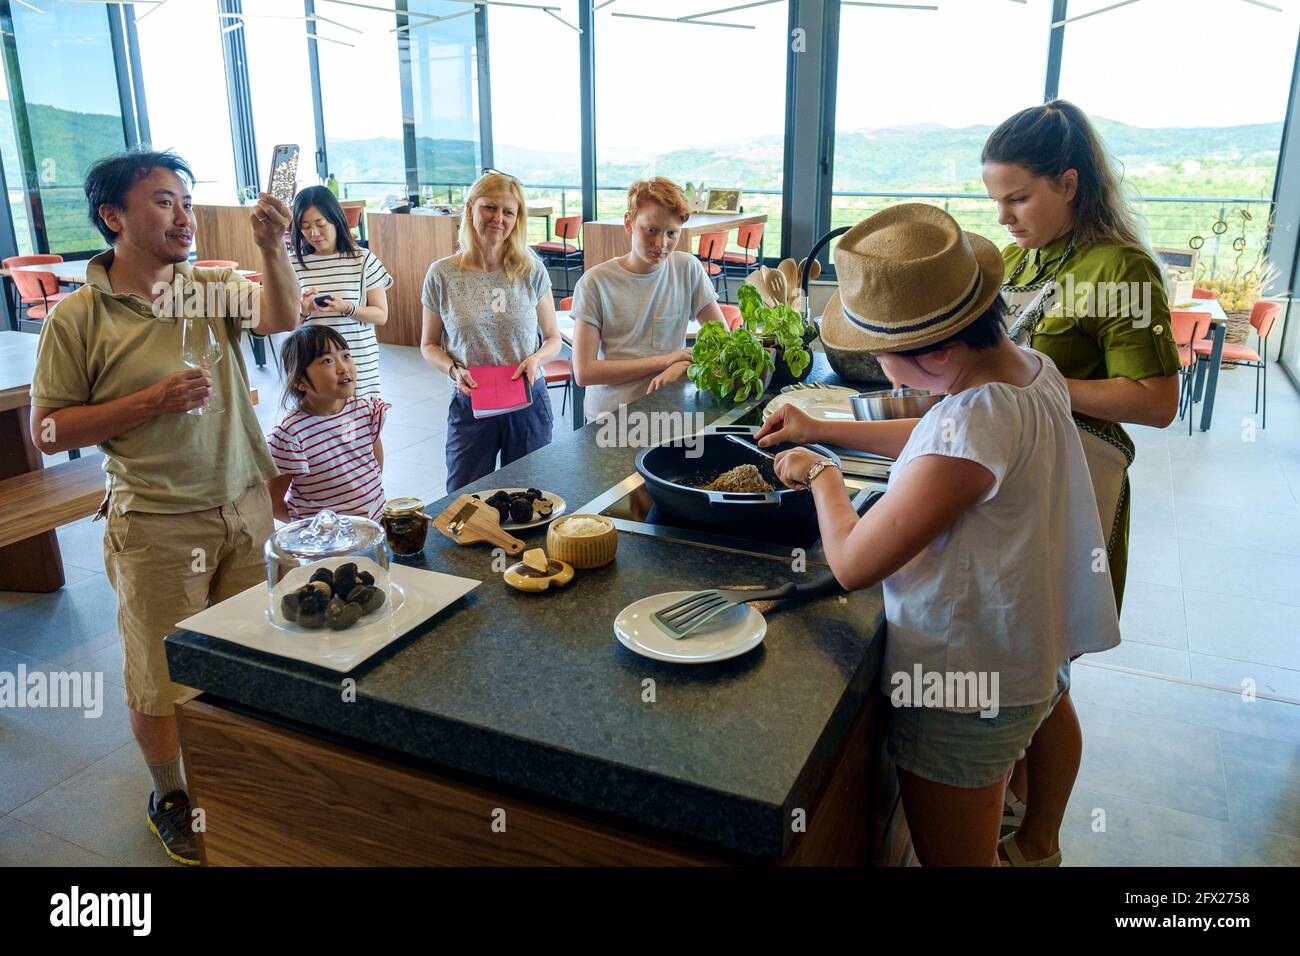 Cookery demonstration at Karlic Tartuf using black truffles they have just found. Croatia Stock Photo